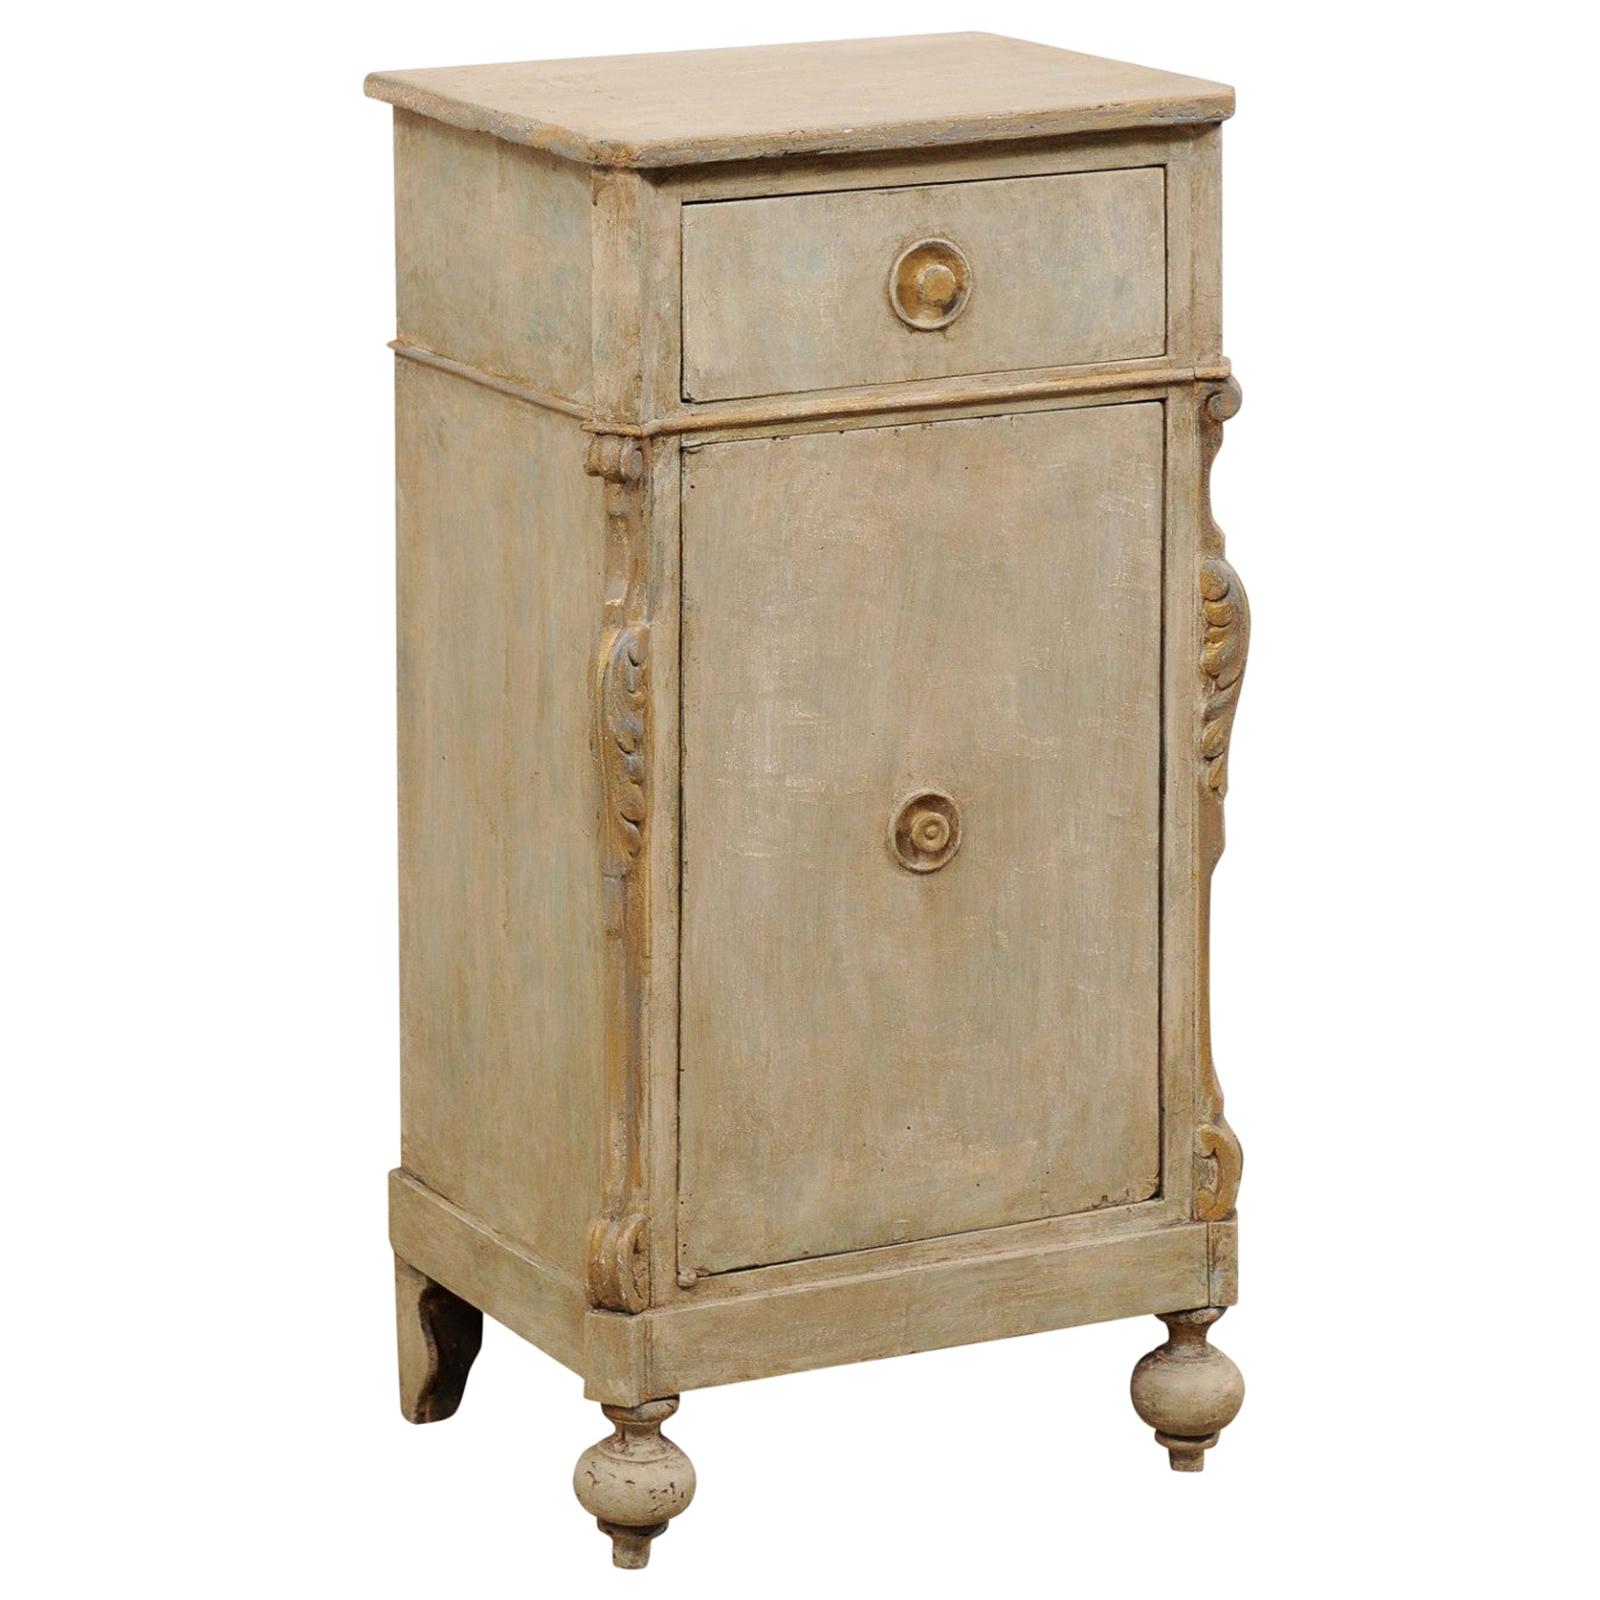 19th C. European Painted Wood Cabinet, Cute Petite Size!  Light Blue/Grey w/Gold